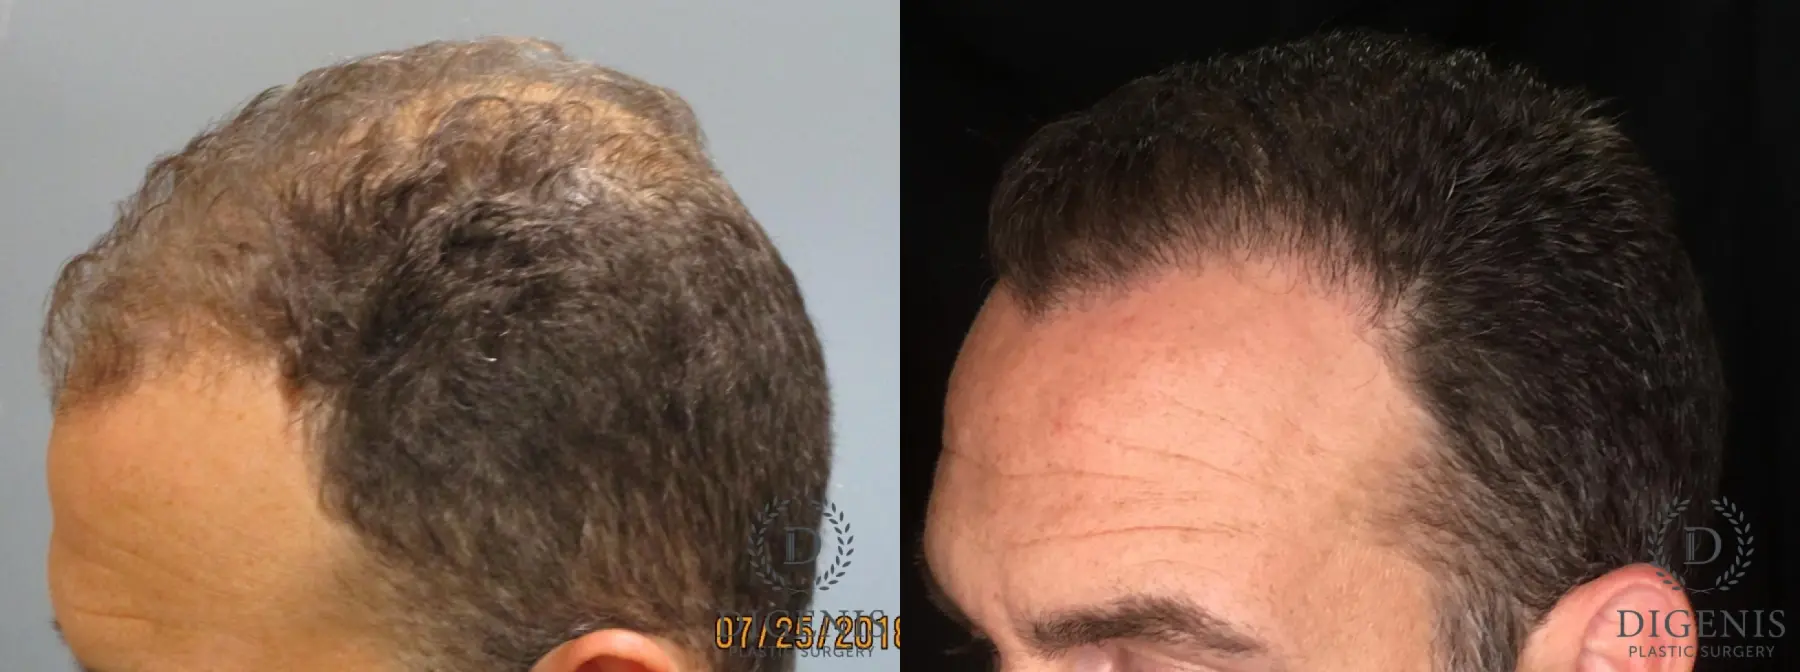 NeoGraft Hair Restoration: Patient 2 - Before and After 1